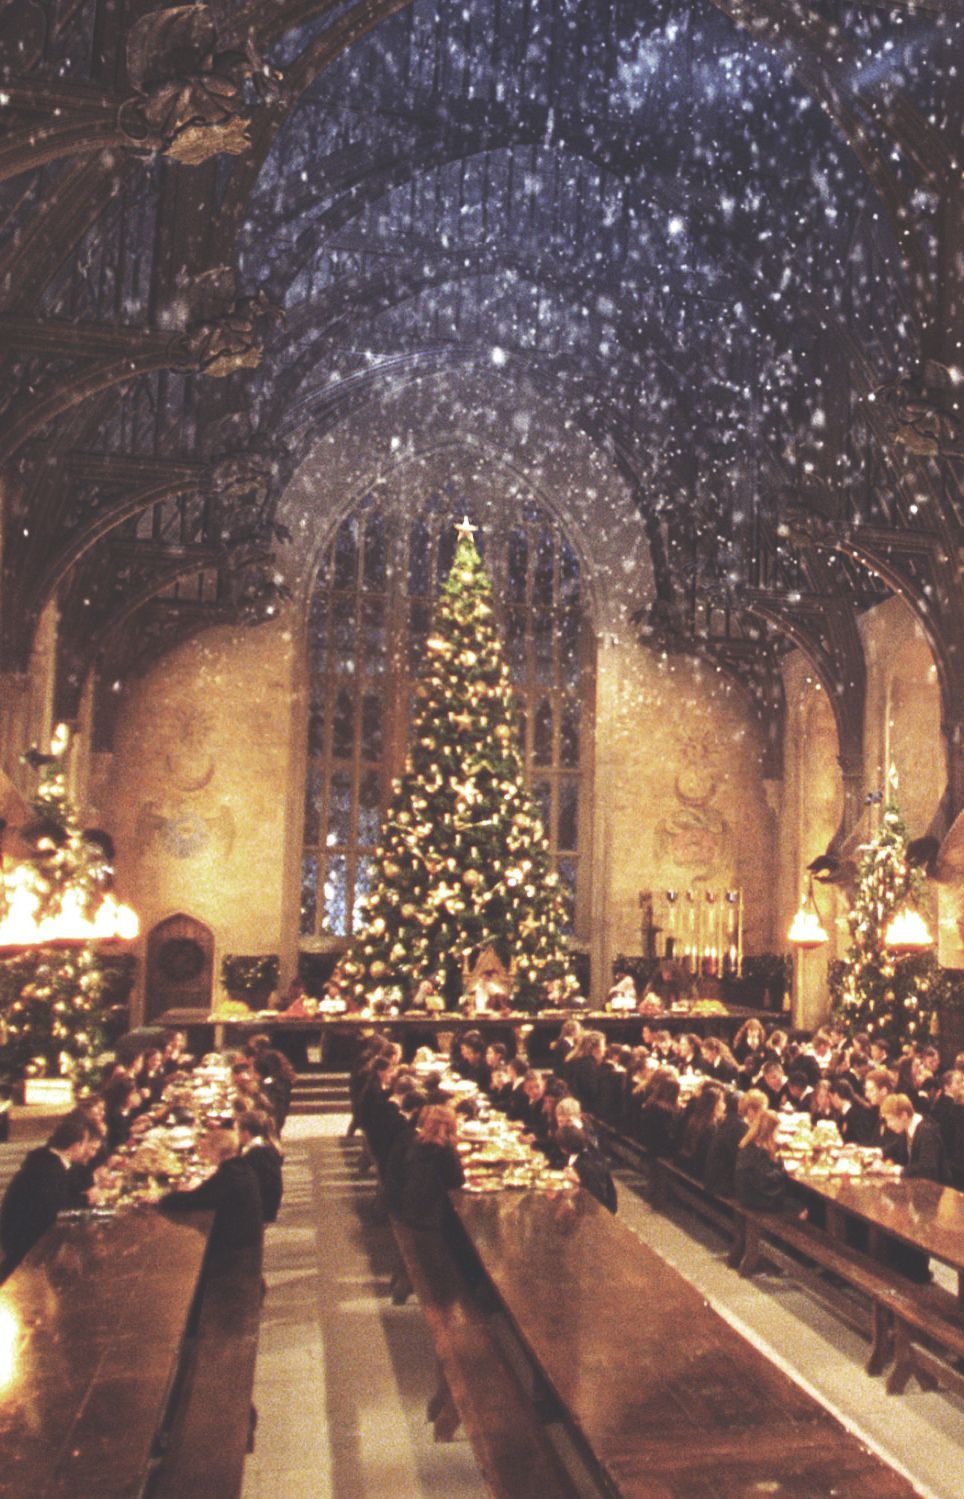 Harry Potter Christmas Iphone Wallpapers